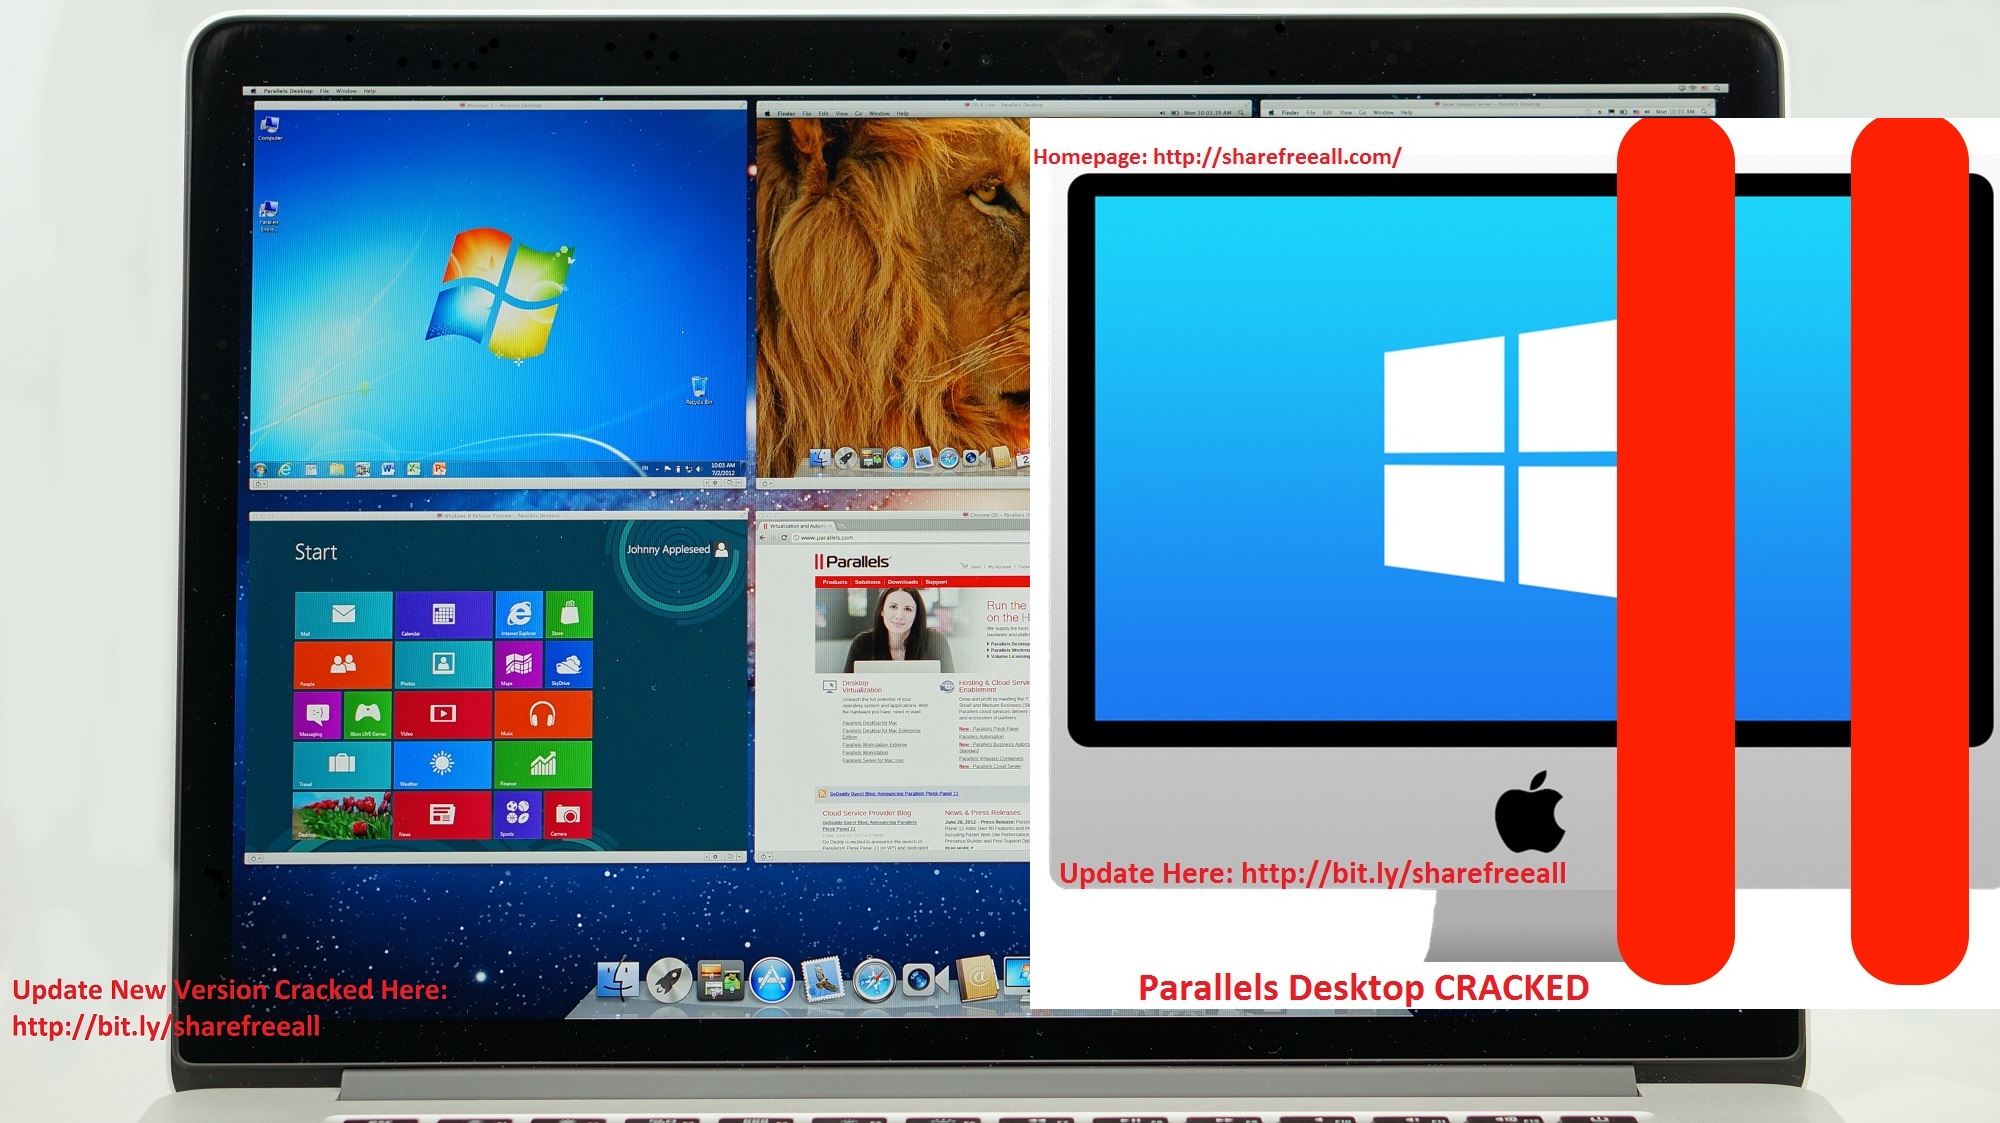 parallels for mac windows xp